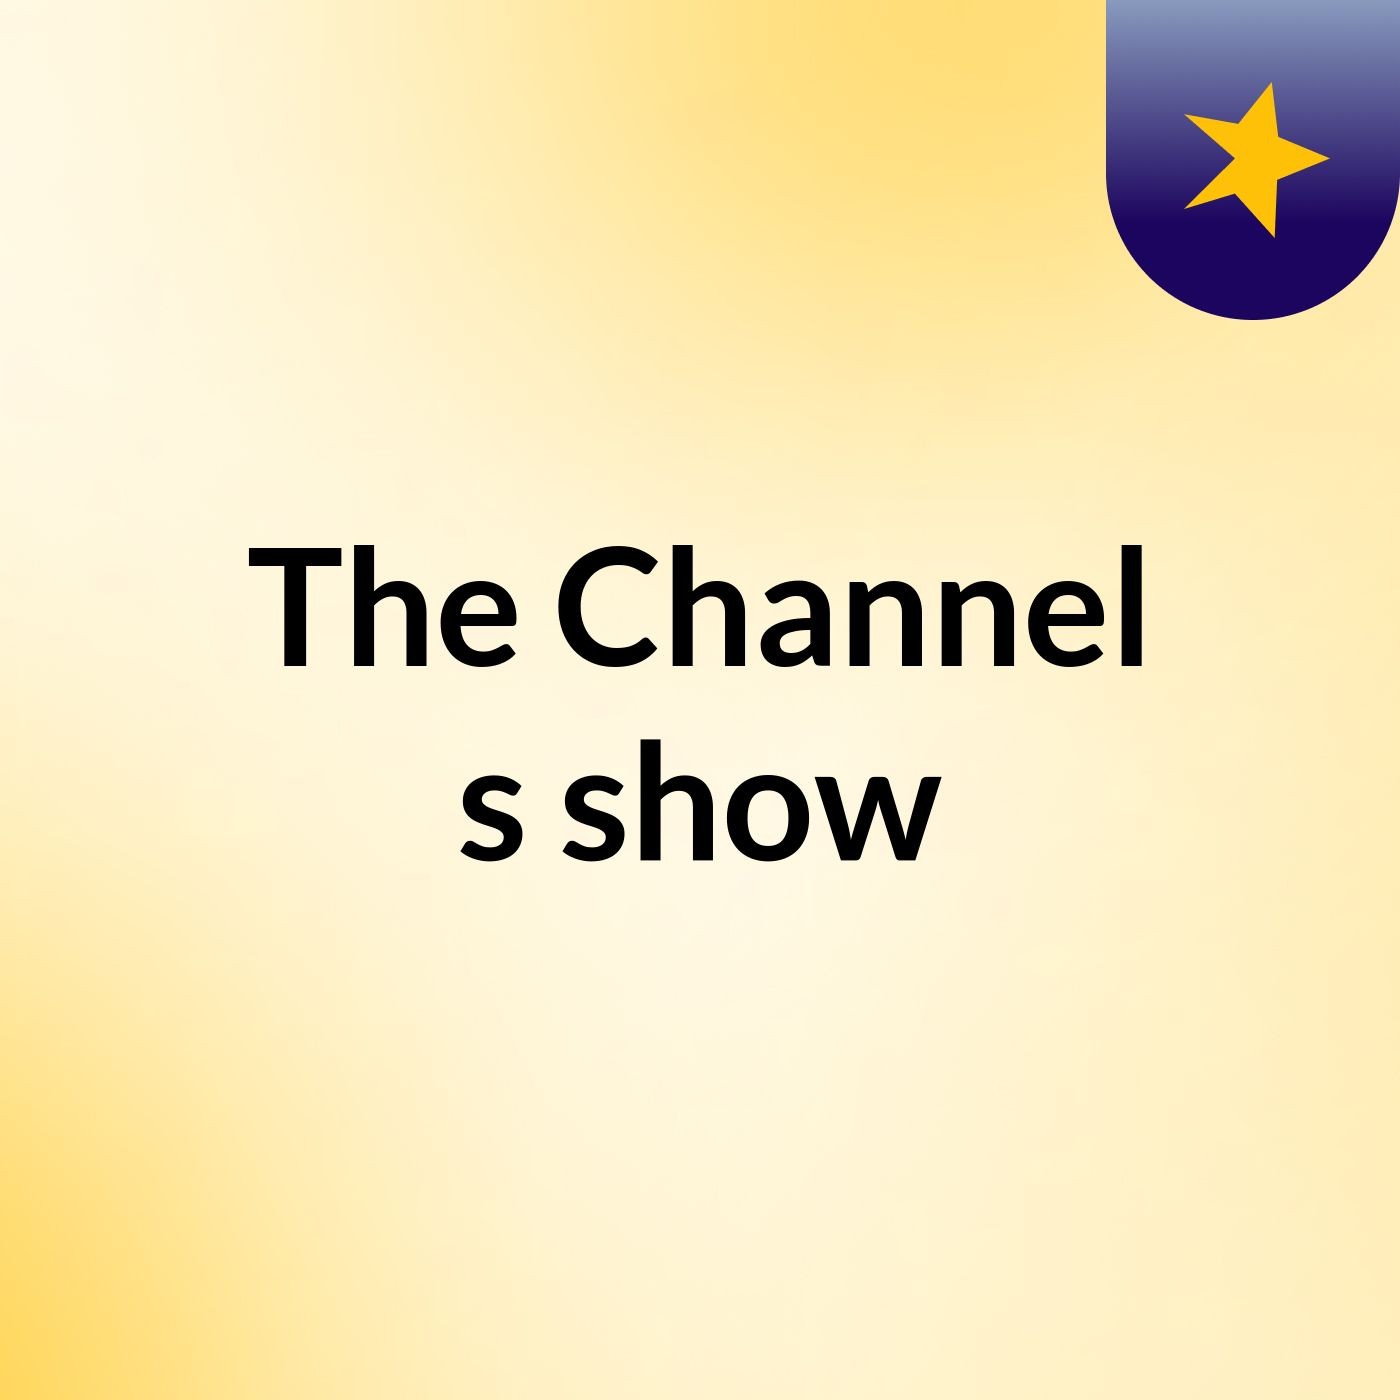 Episode 7 - The Channel's show